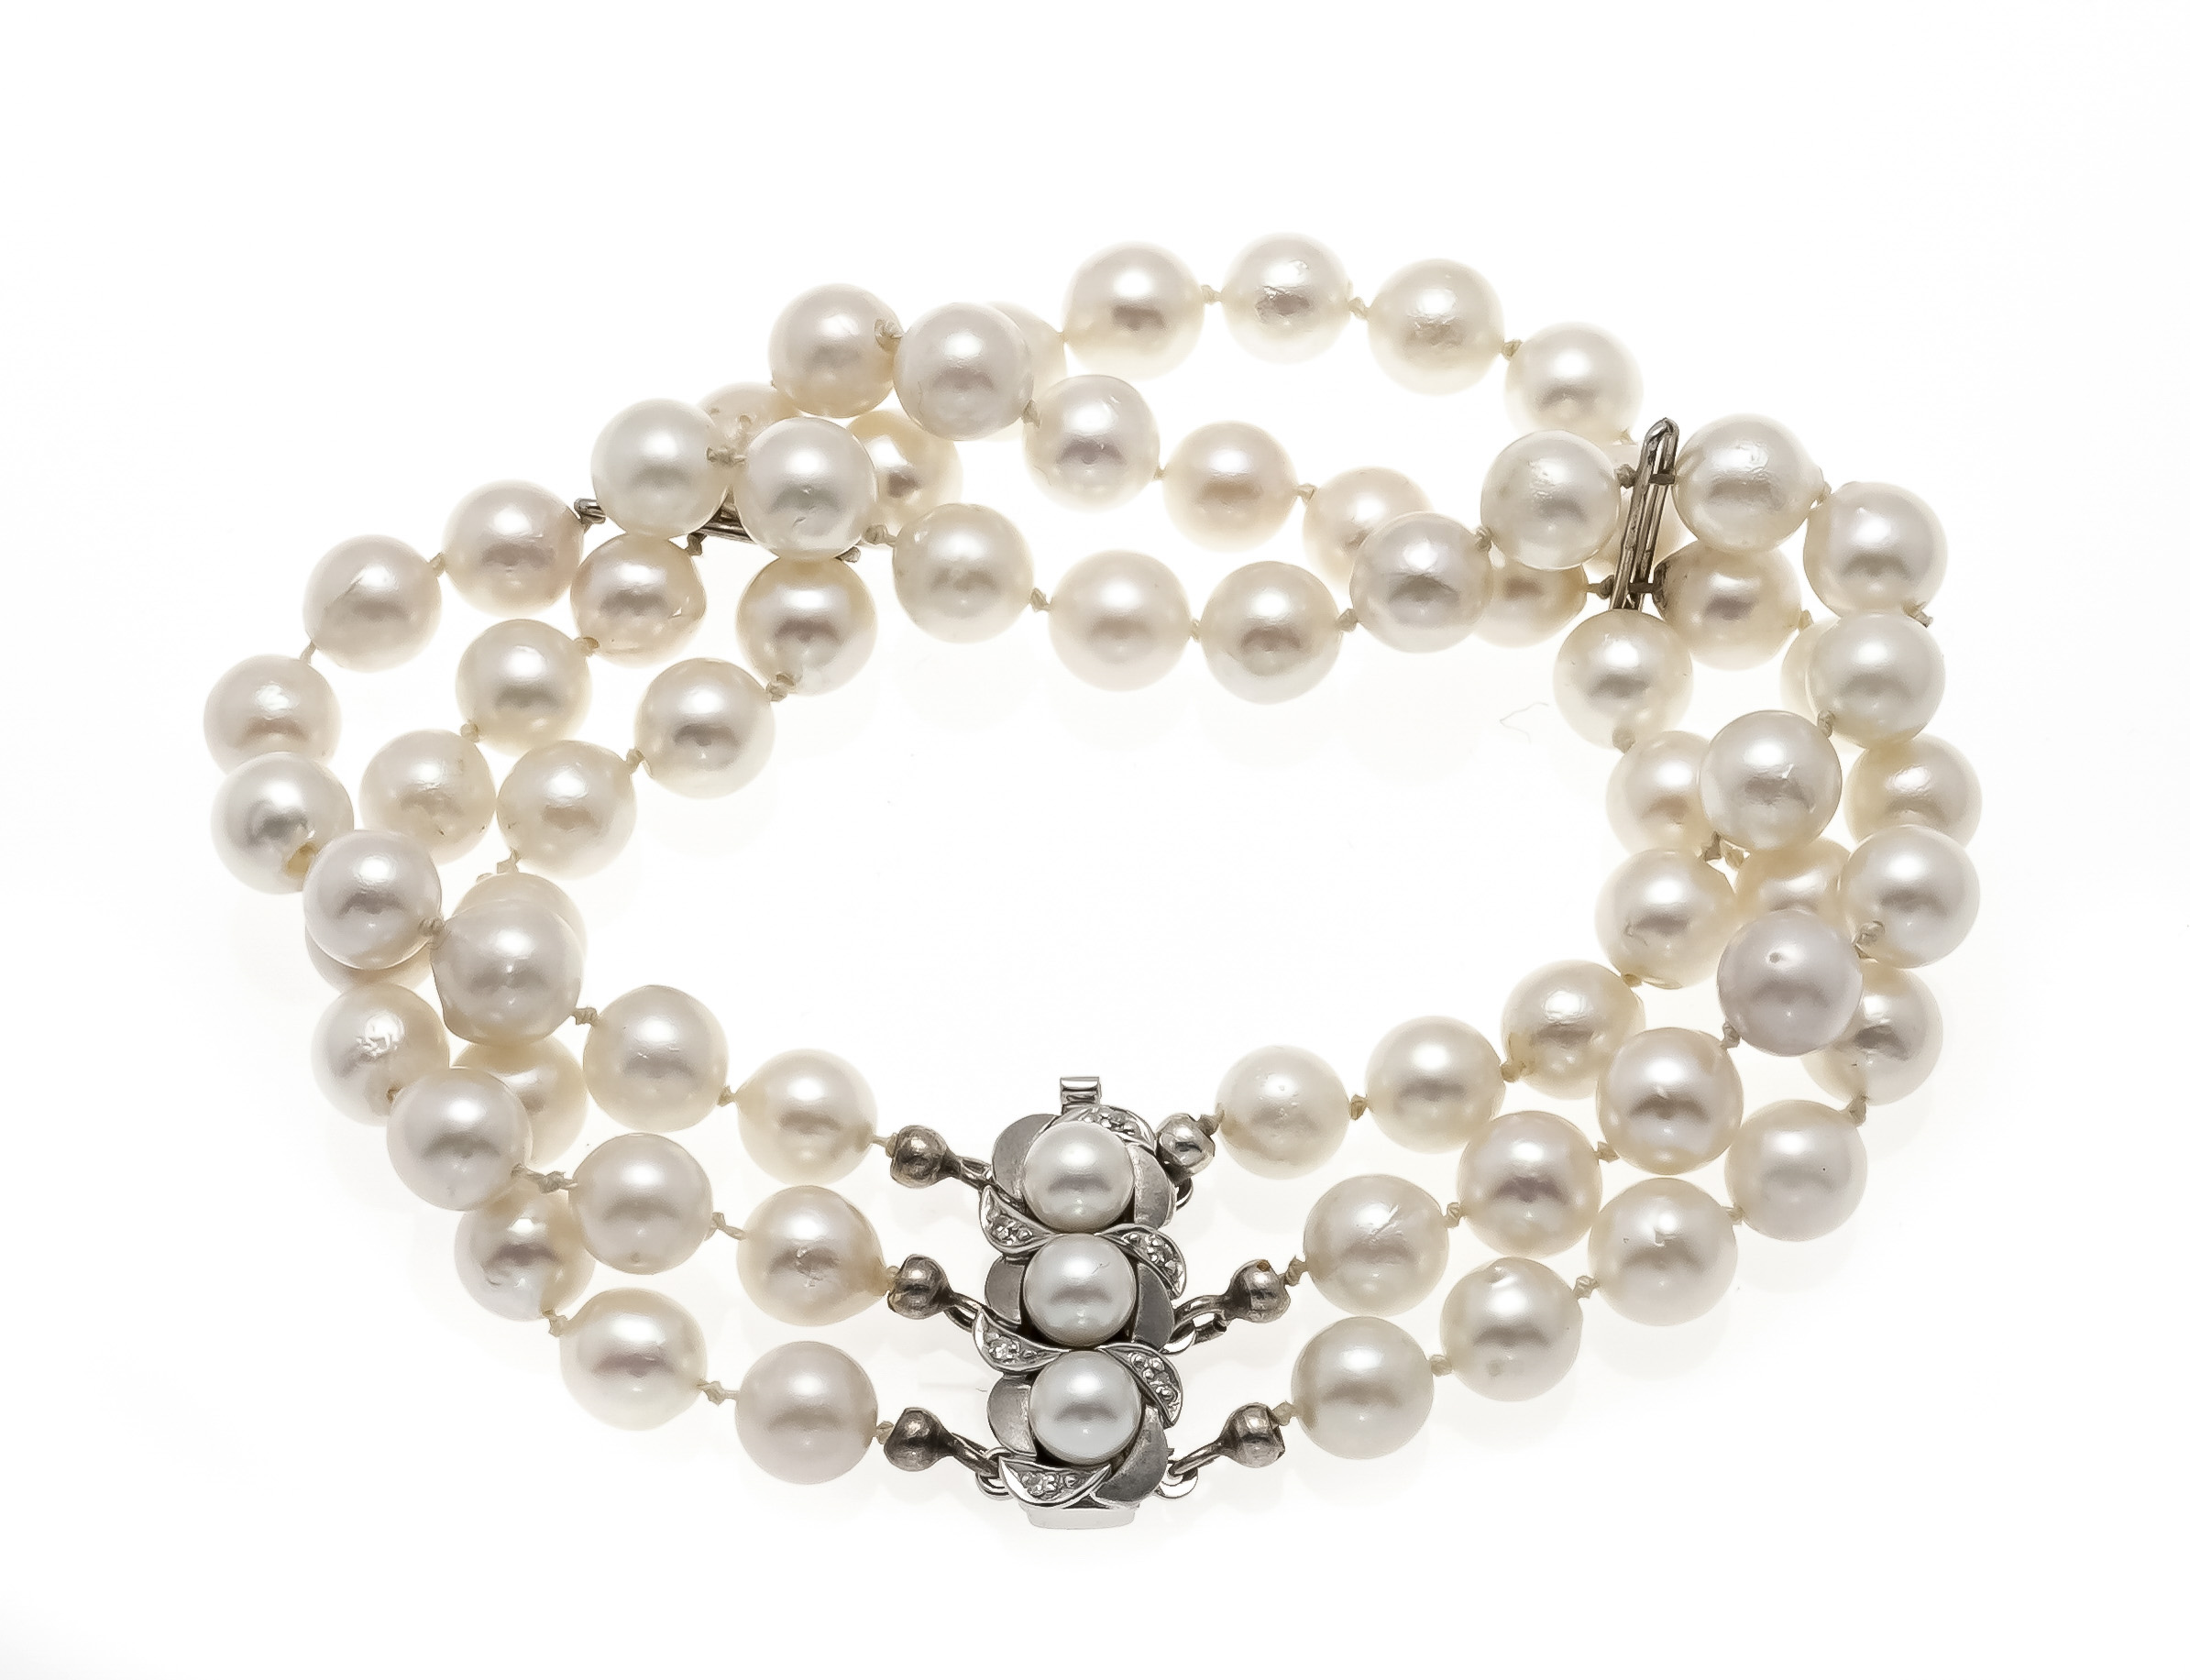 3-row Akoya pearl bracelet with box clasp WG 585/000 with 3 white Akoya pearls 5 mm and 6